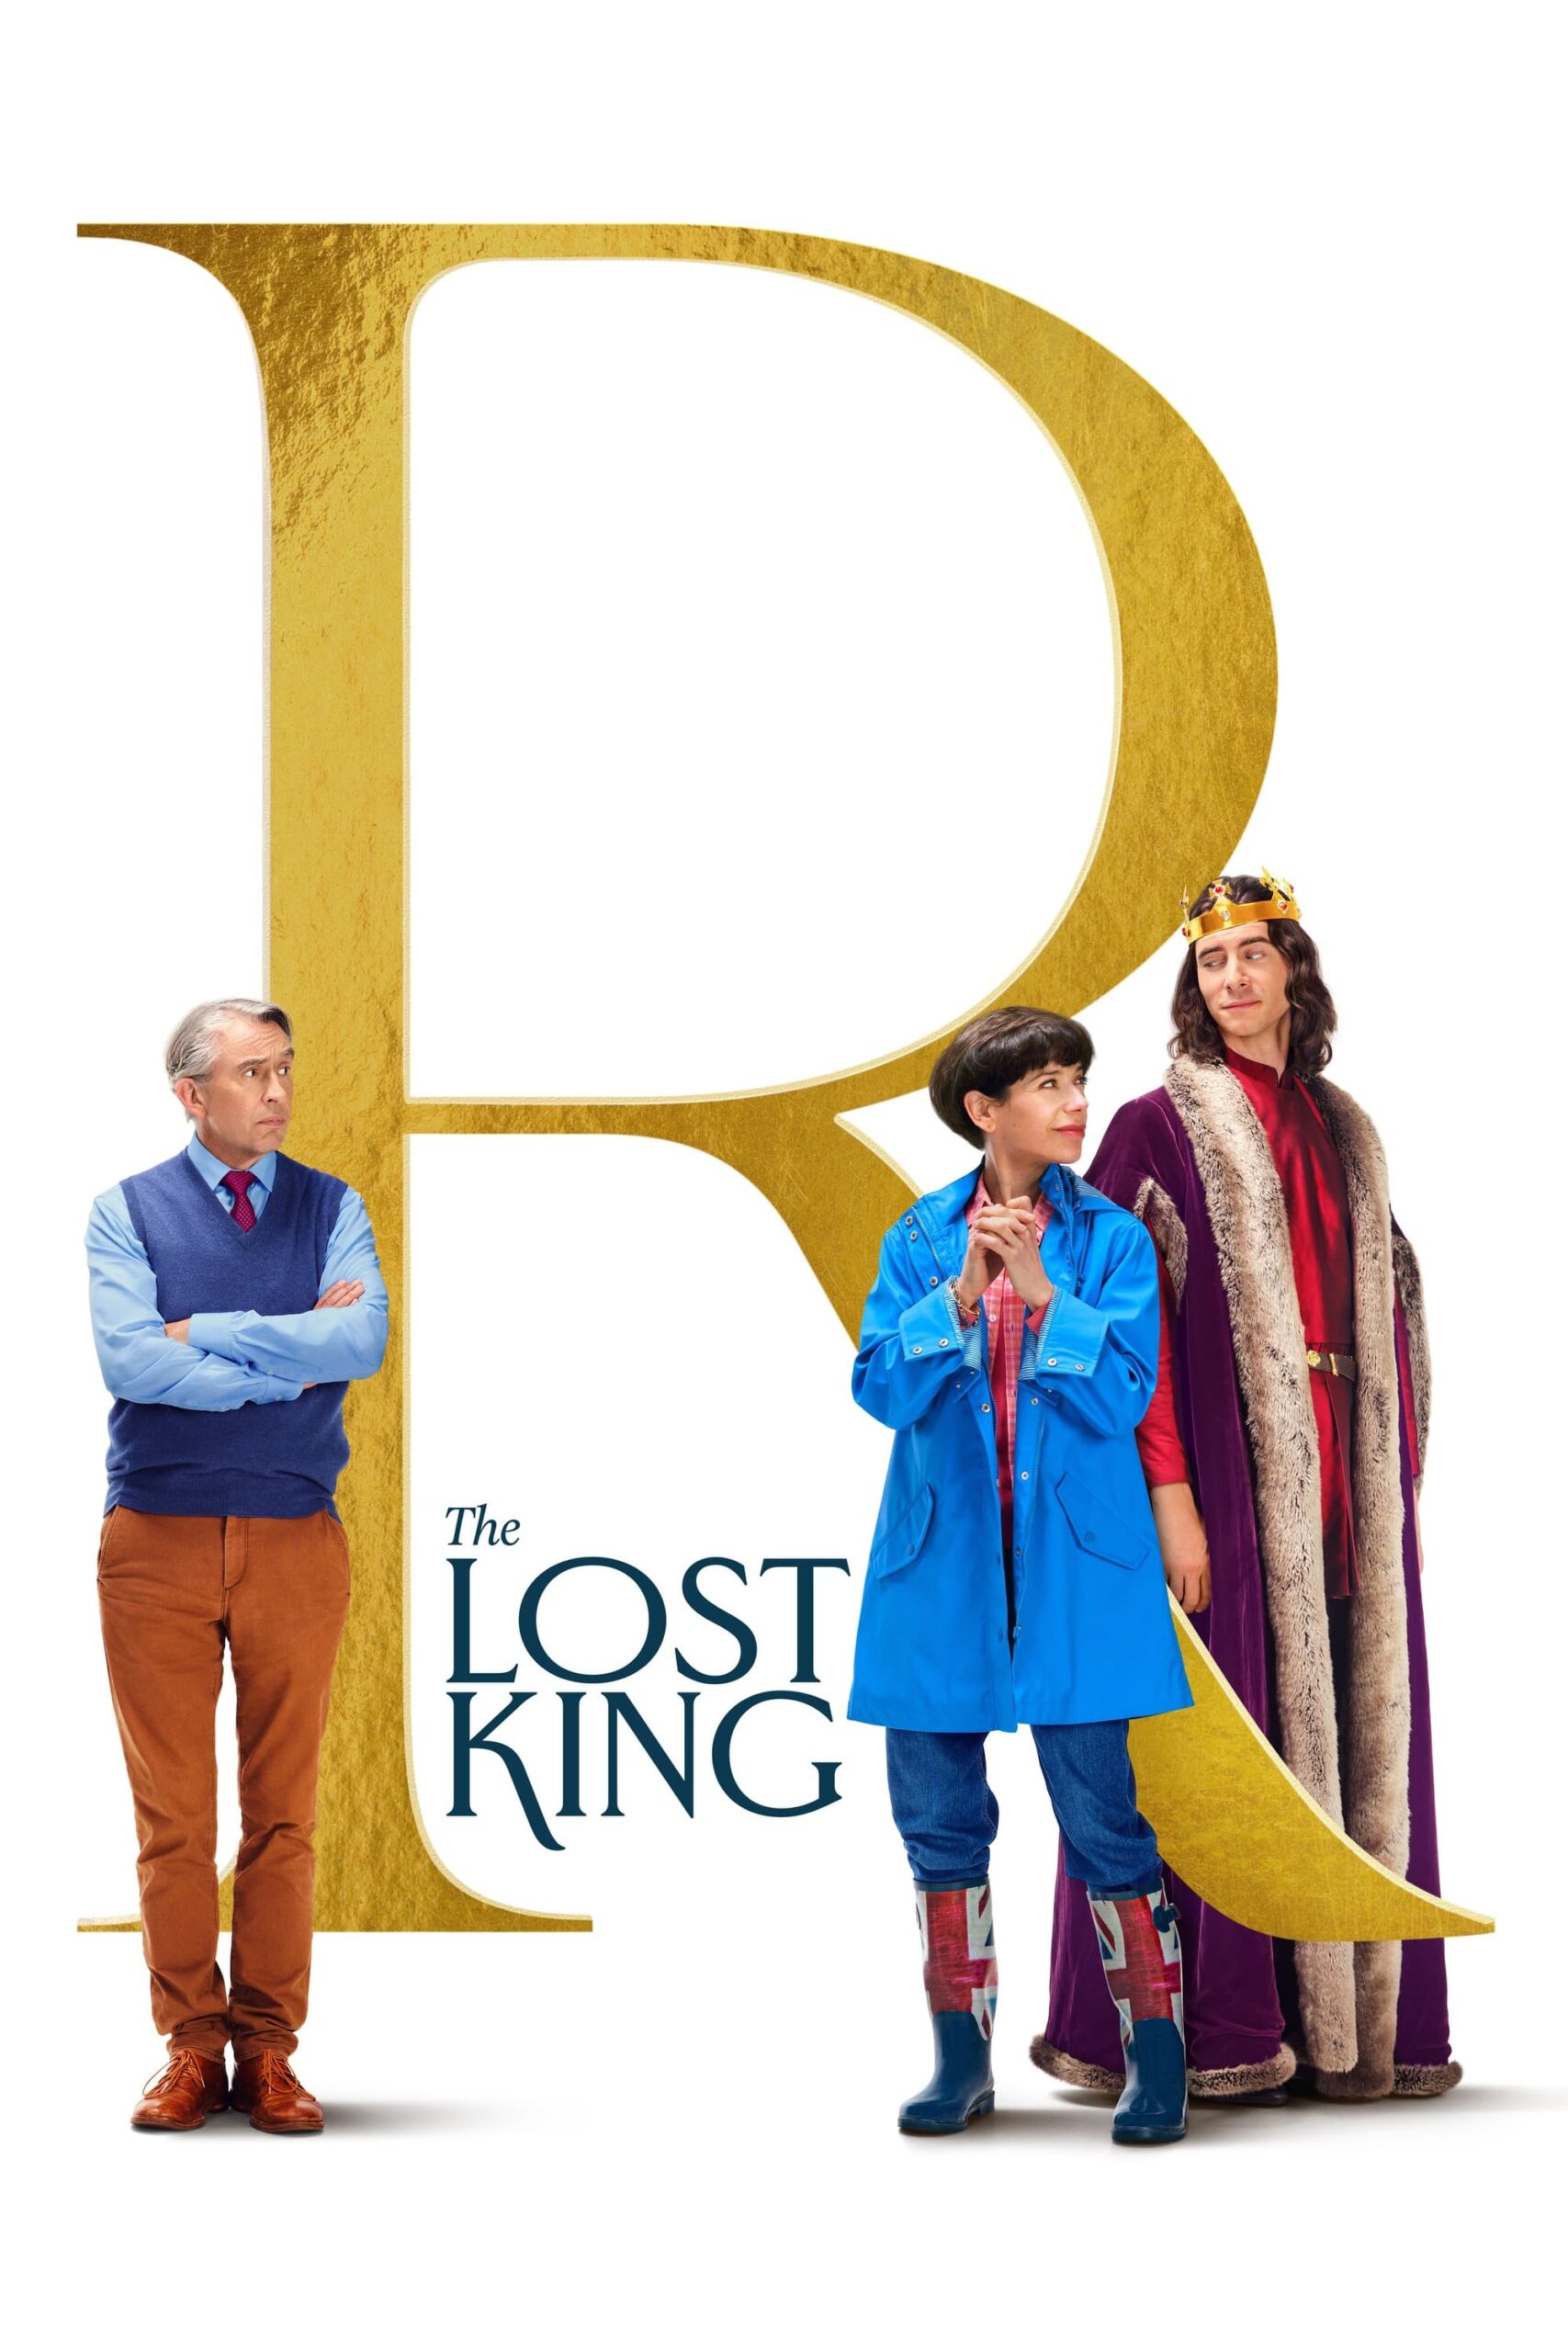 Poster for the movie "The Lost King"